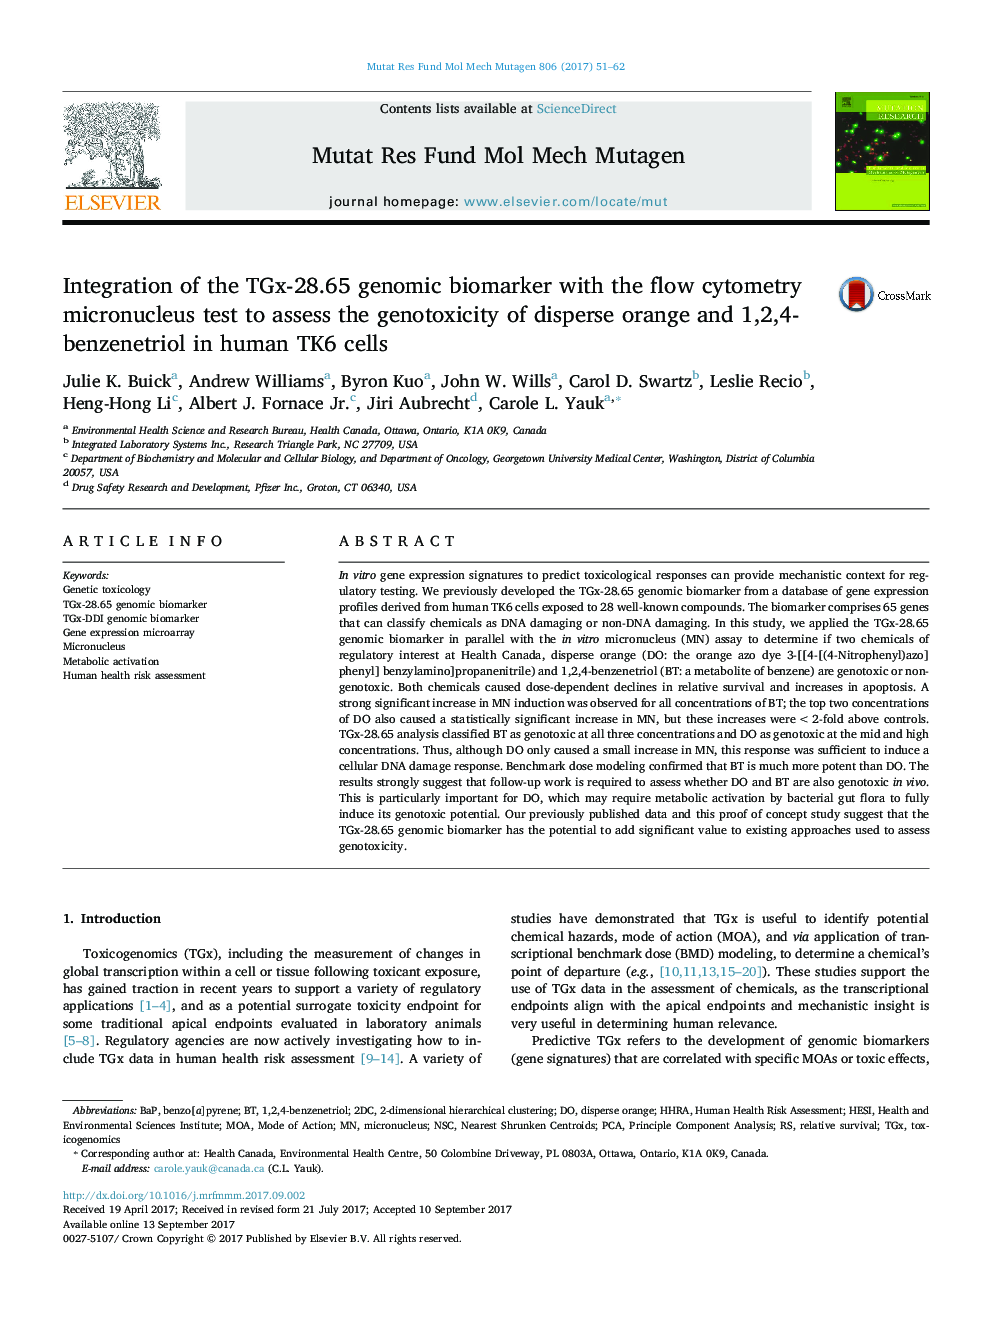 Integration of the TGx-28.65 genomic biomarker with the flow cytometry micronucleus test to assess the genotoxicity of disperse orange and 1,2,4-benzenetriol in human TK6 cells